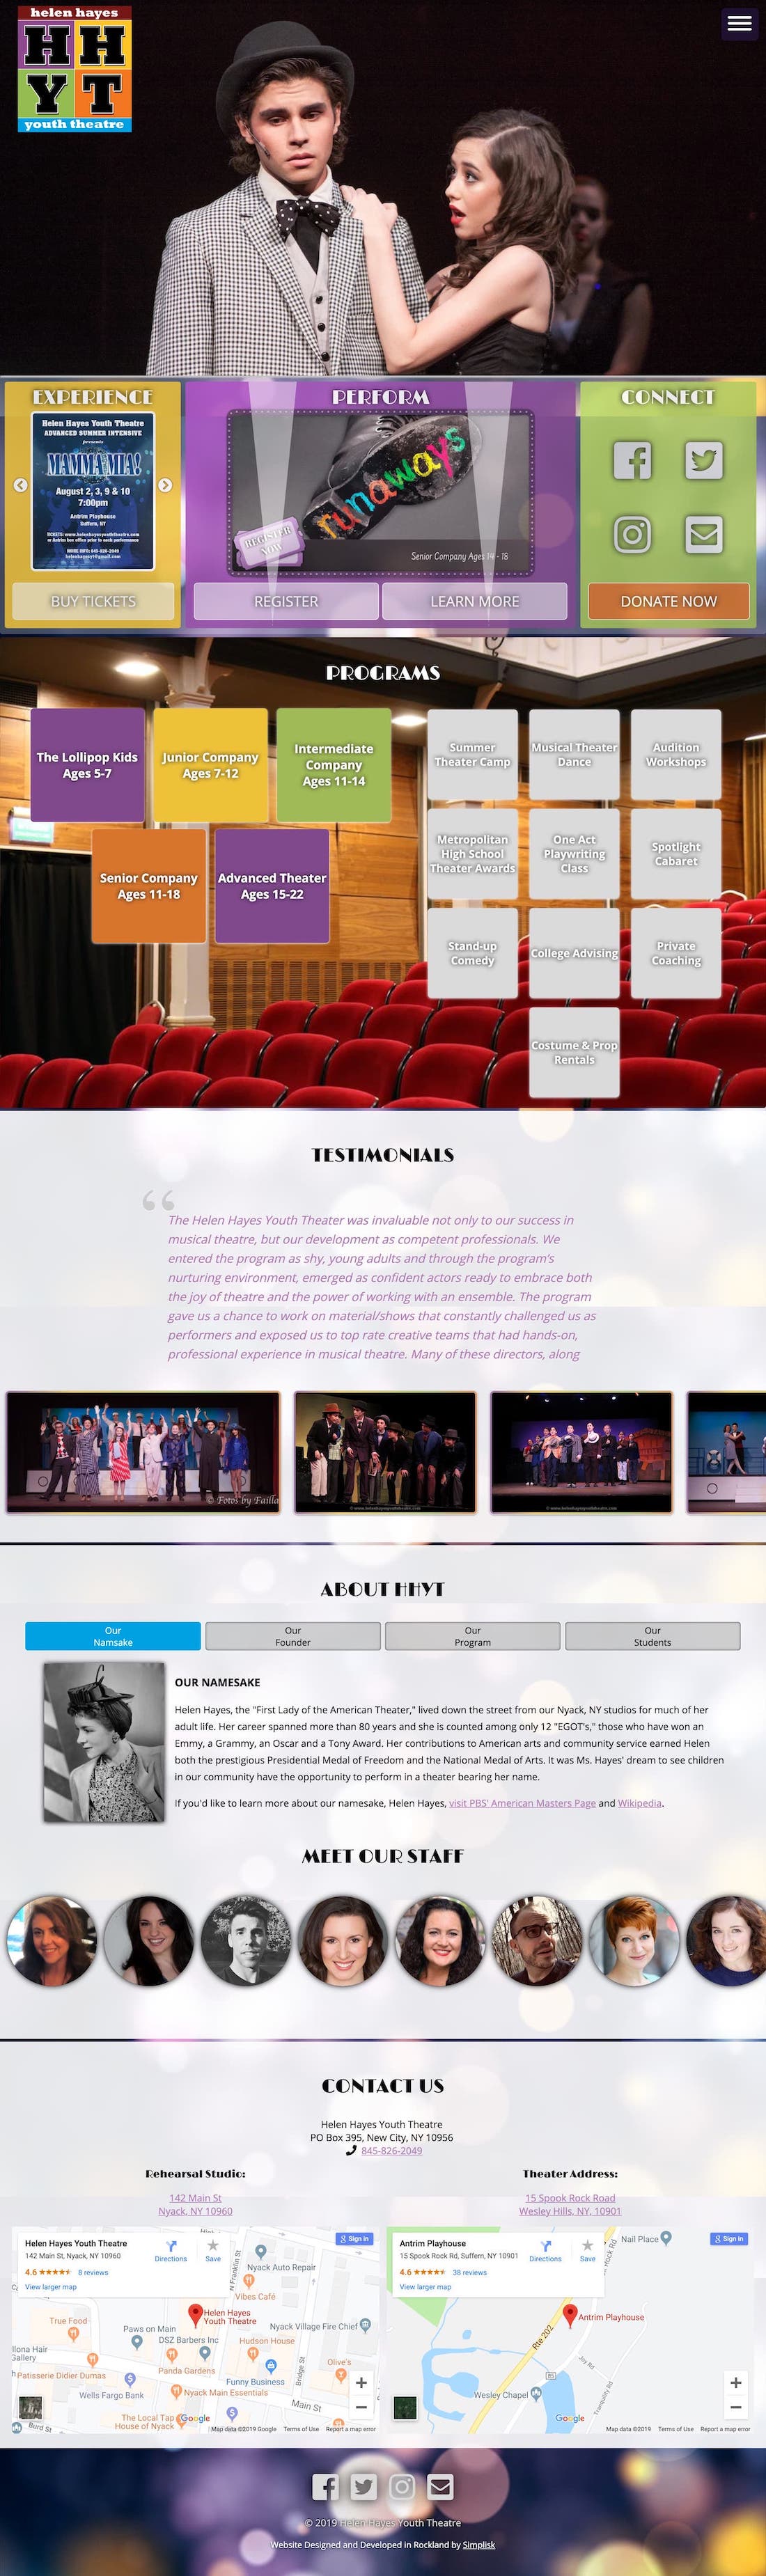 Helen Hayes Youth Theater Website Design